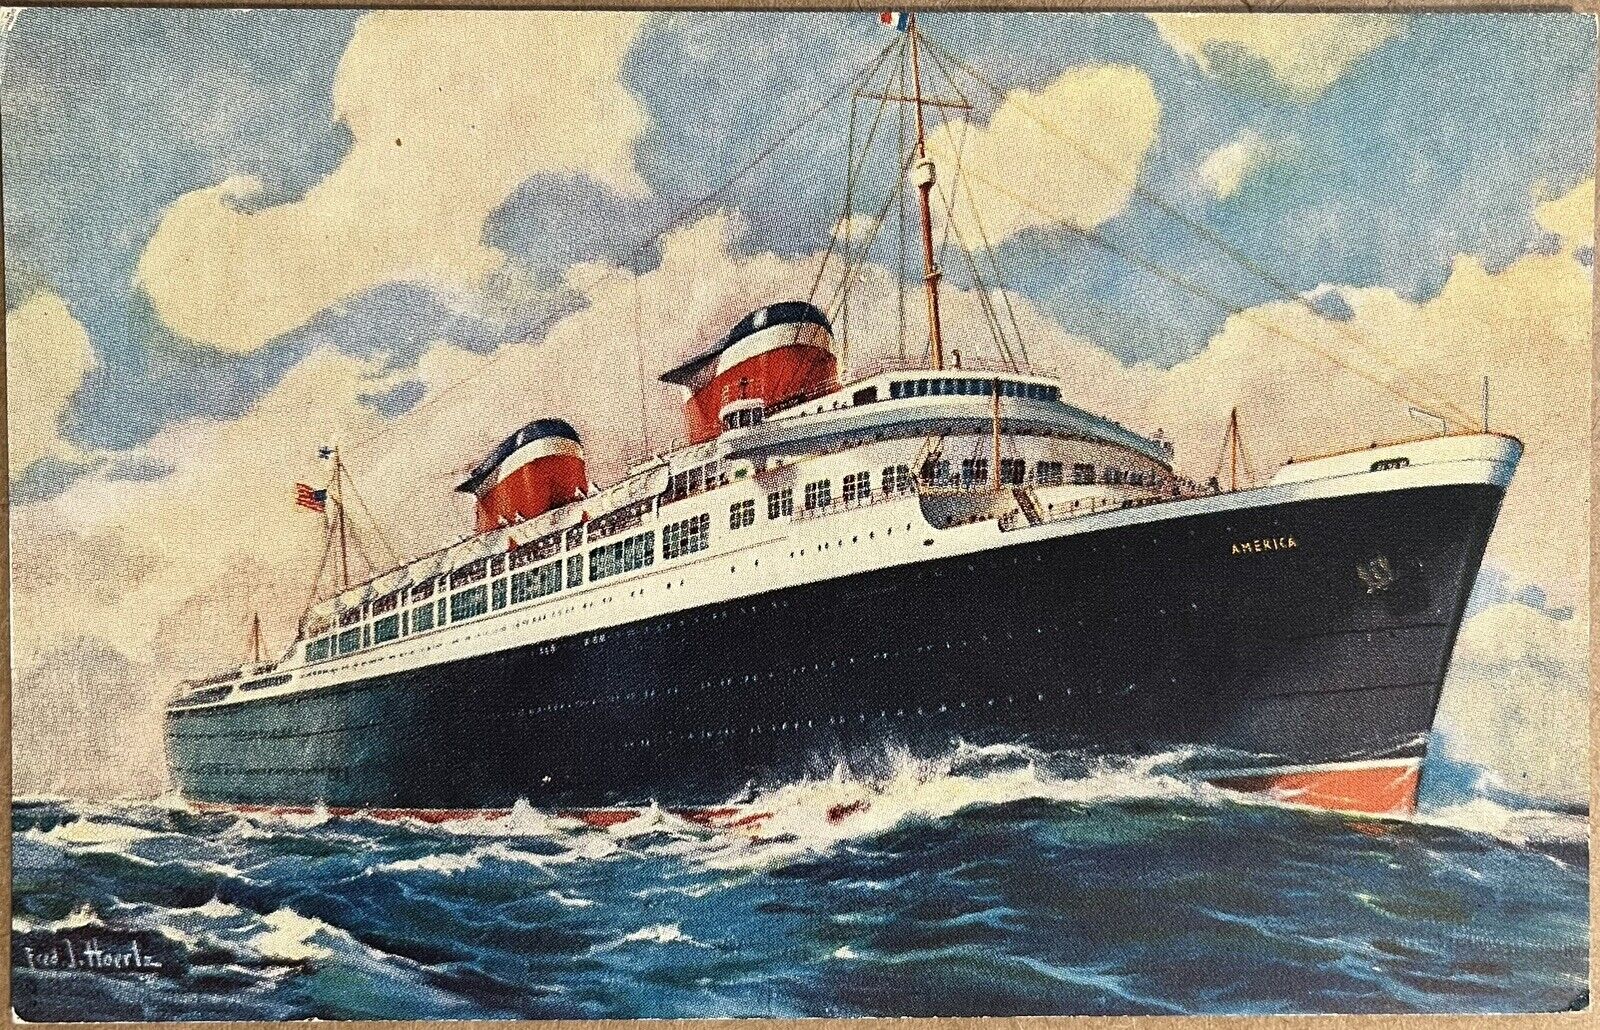 Historic S.S. America Steamer Ship Wrecked Sunk in 1994 Vintage Postcard c1940